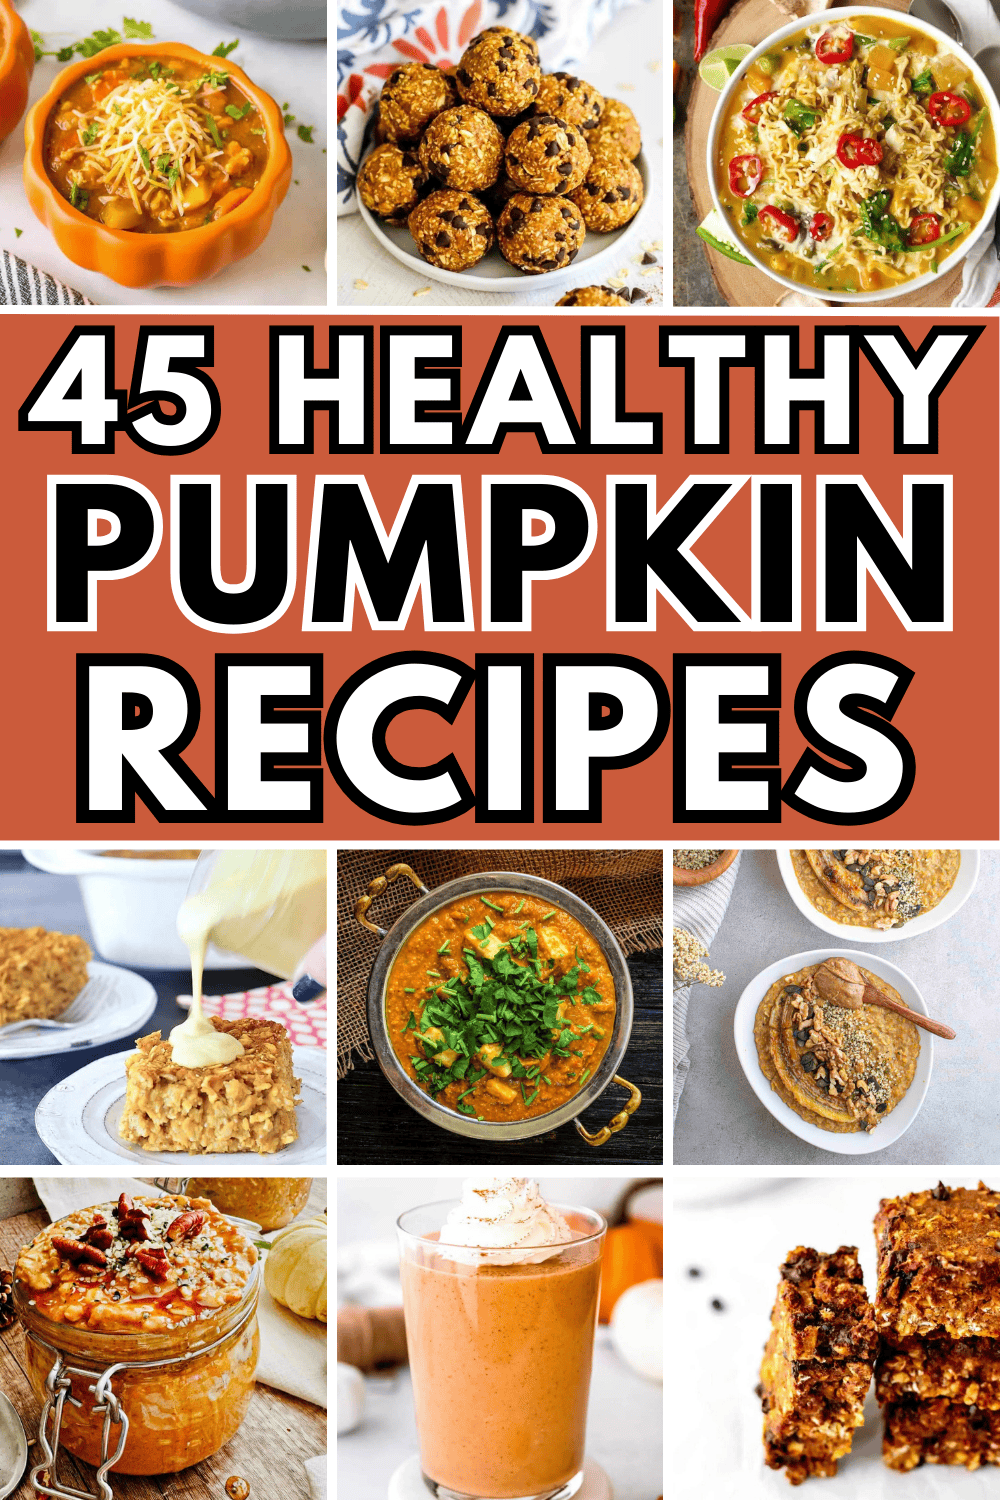 Easy healthy pumpkin recipes! Savory fall dinners, breakfast ideas, desserts, and fall snacks all using canned or fresh pumpkin. Pumpkin recipes healthy, healthy pumpkin recipes for kids, quick healthy pumpkin recipes, healthy pumpkin desserts, canned pumpkin recipes healthy, healthy pumpkin pie, pumpkin protein, healthy recipes using canned pumpkin, roasted pumpkin recipes healthy, easy pumpkin recipes healthy simple, fresh pumpkin recipes healthy, fall food recipes healthy, pumpkin dishes.